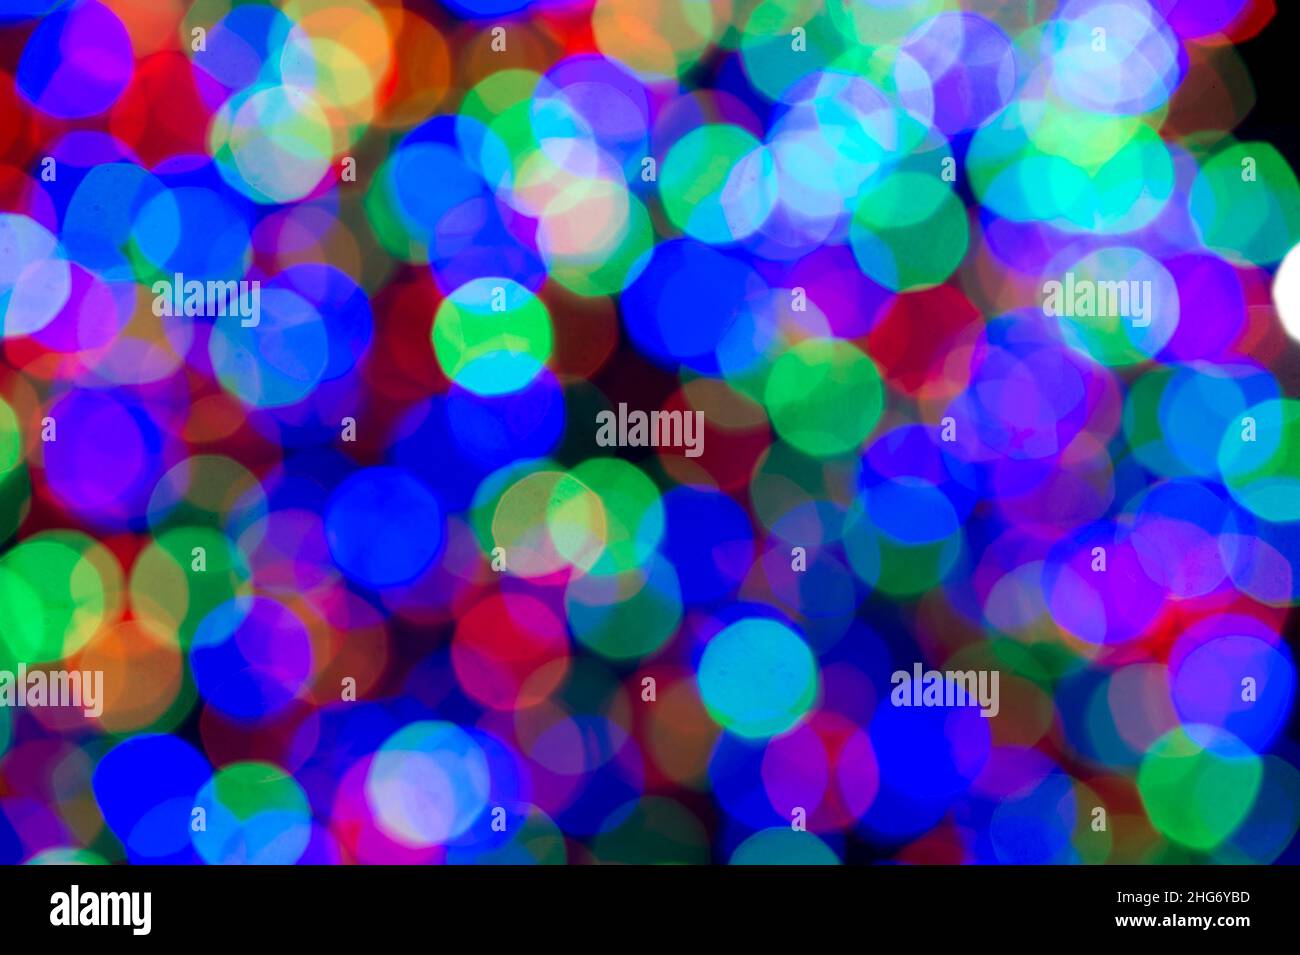 Christmas lights abstract pattern Stock Photo